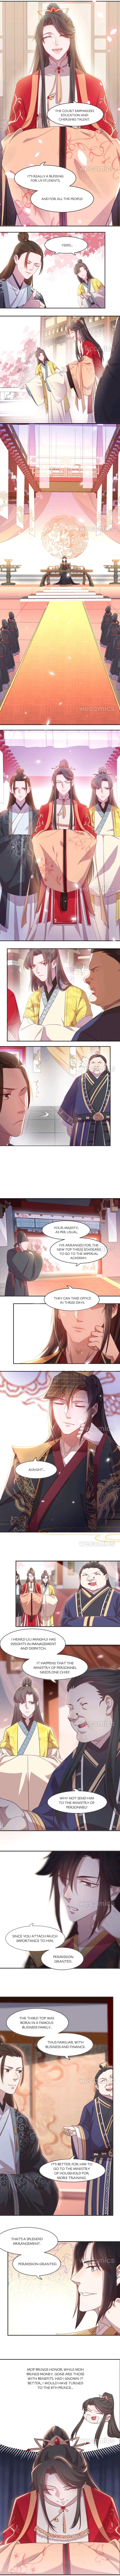 Red Thread Of Fate - Page 2